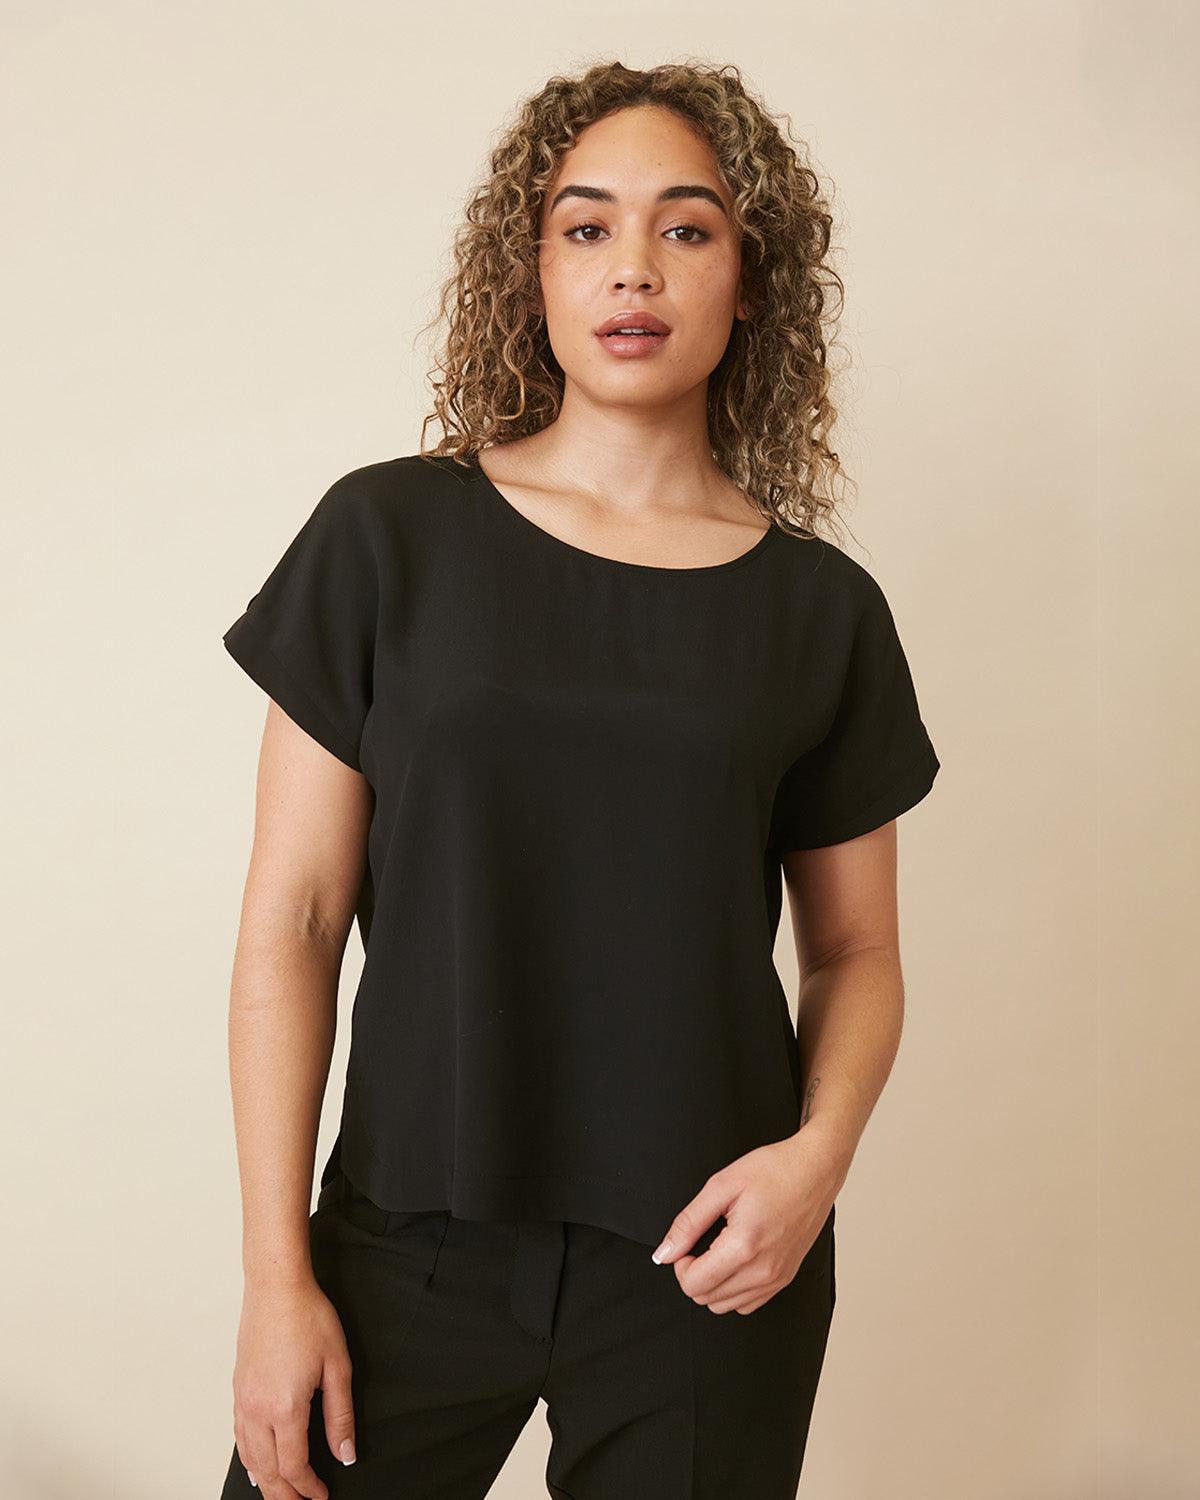 "#color_BLACK|Zoe is 5'8", wearing a size M